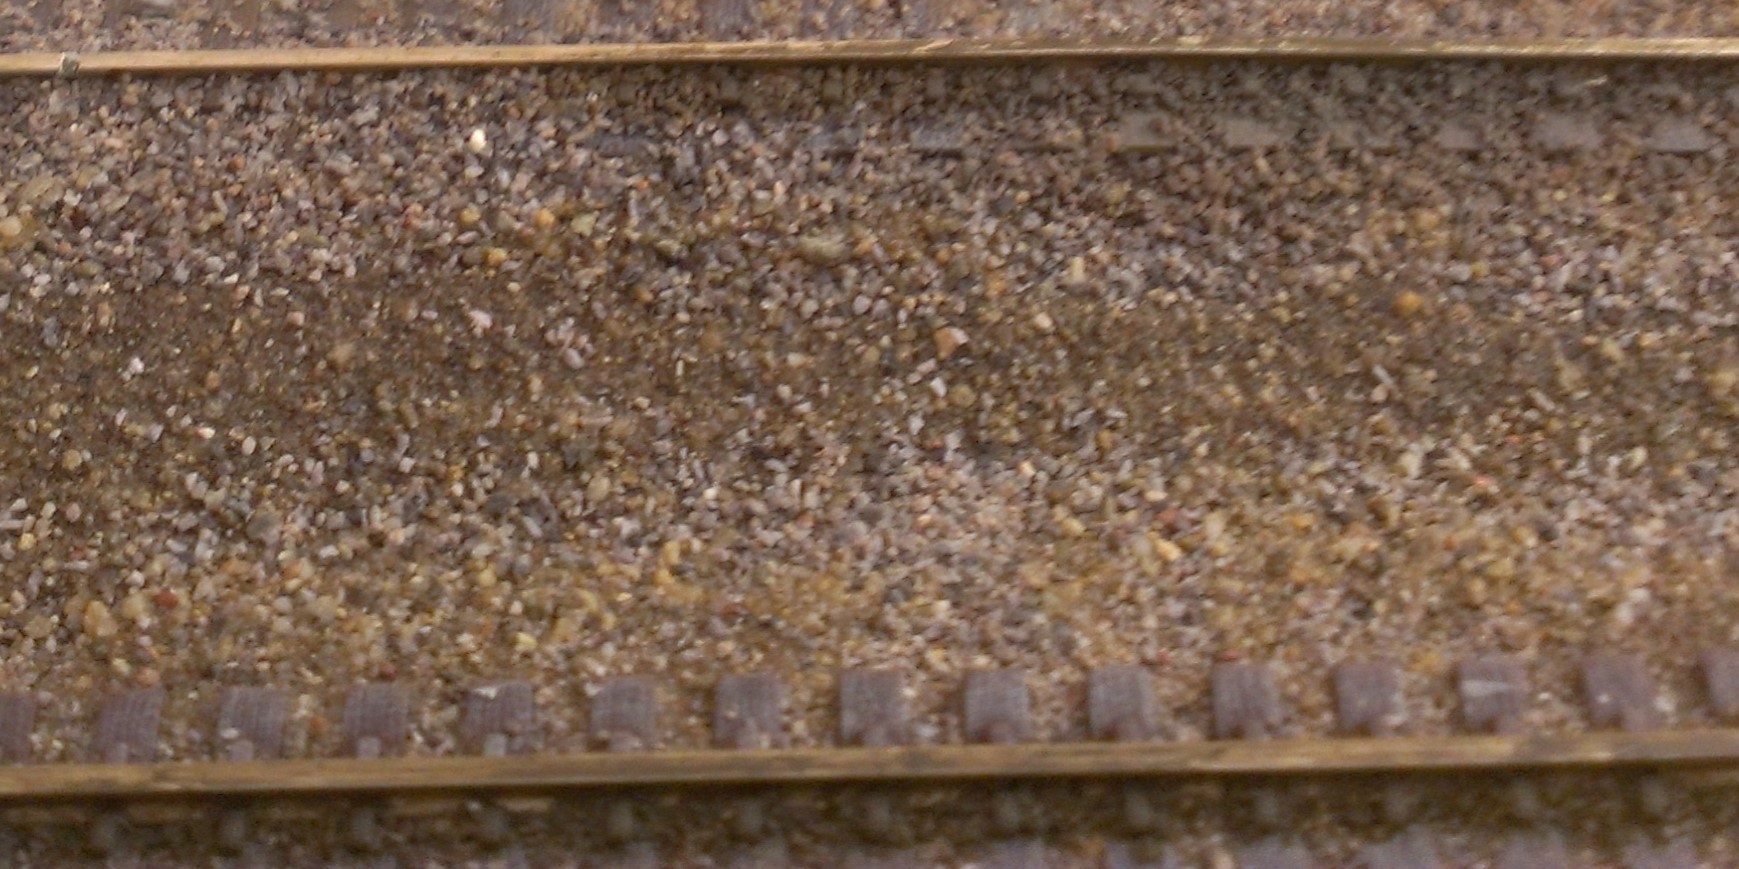 Extreme closeup of N Scale ballast